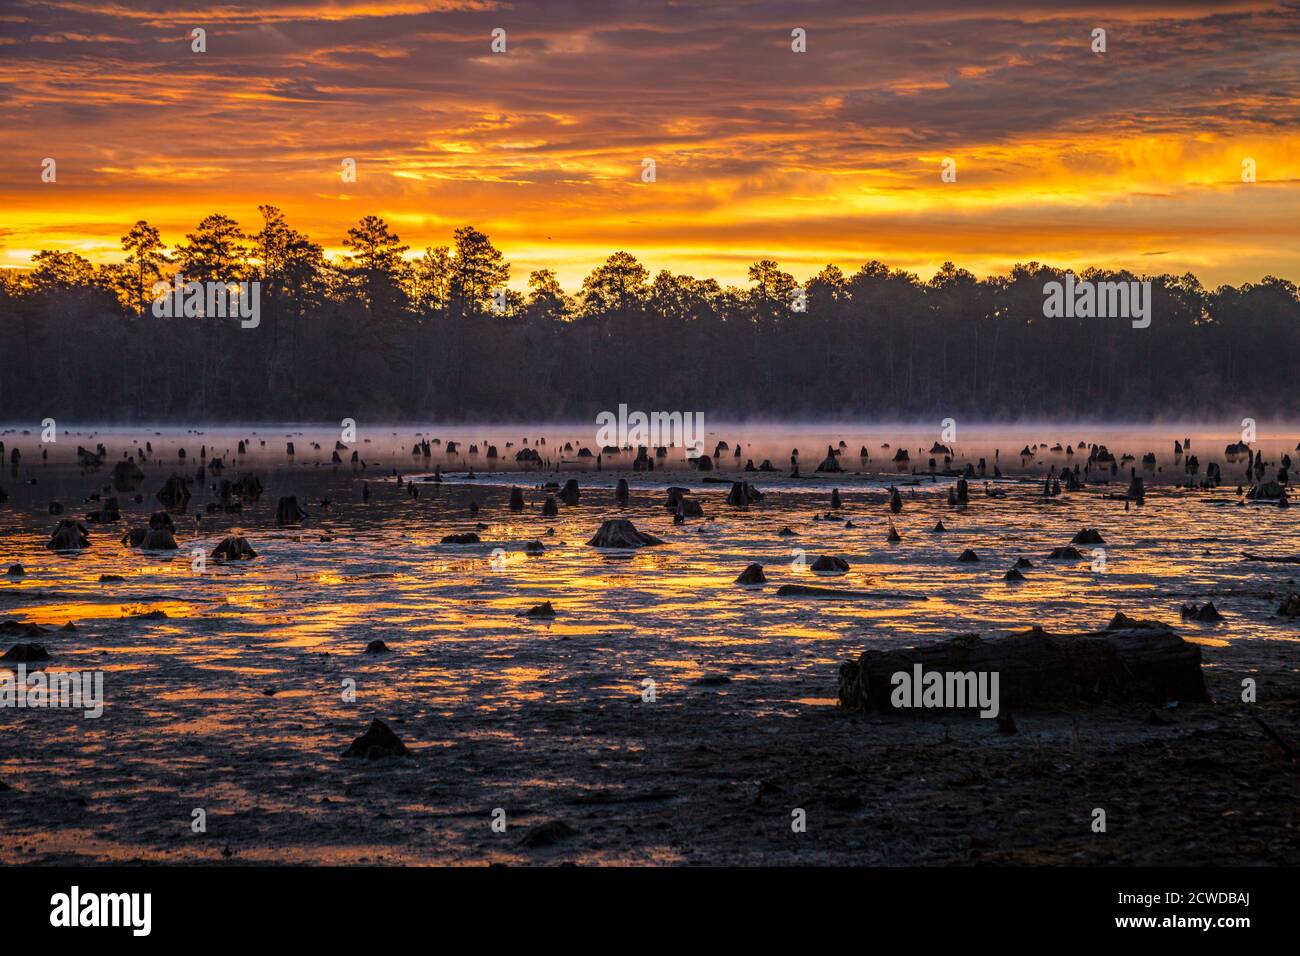 Stumps protrude from low water in Geiger Lake at sunrise in Paul B. Johnson State Park near Hattiesburg, Mississippi, USA Stock Photo